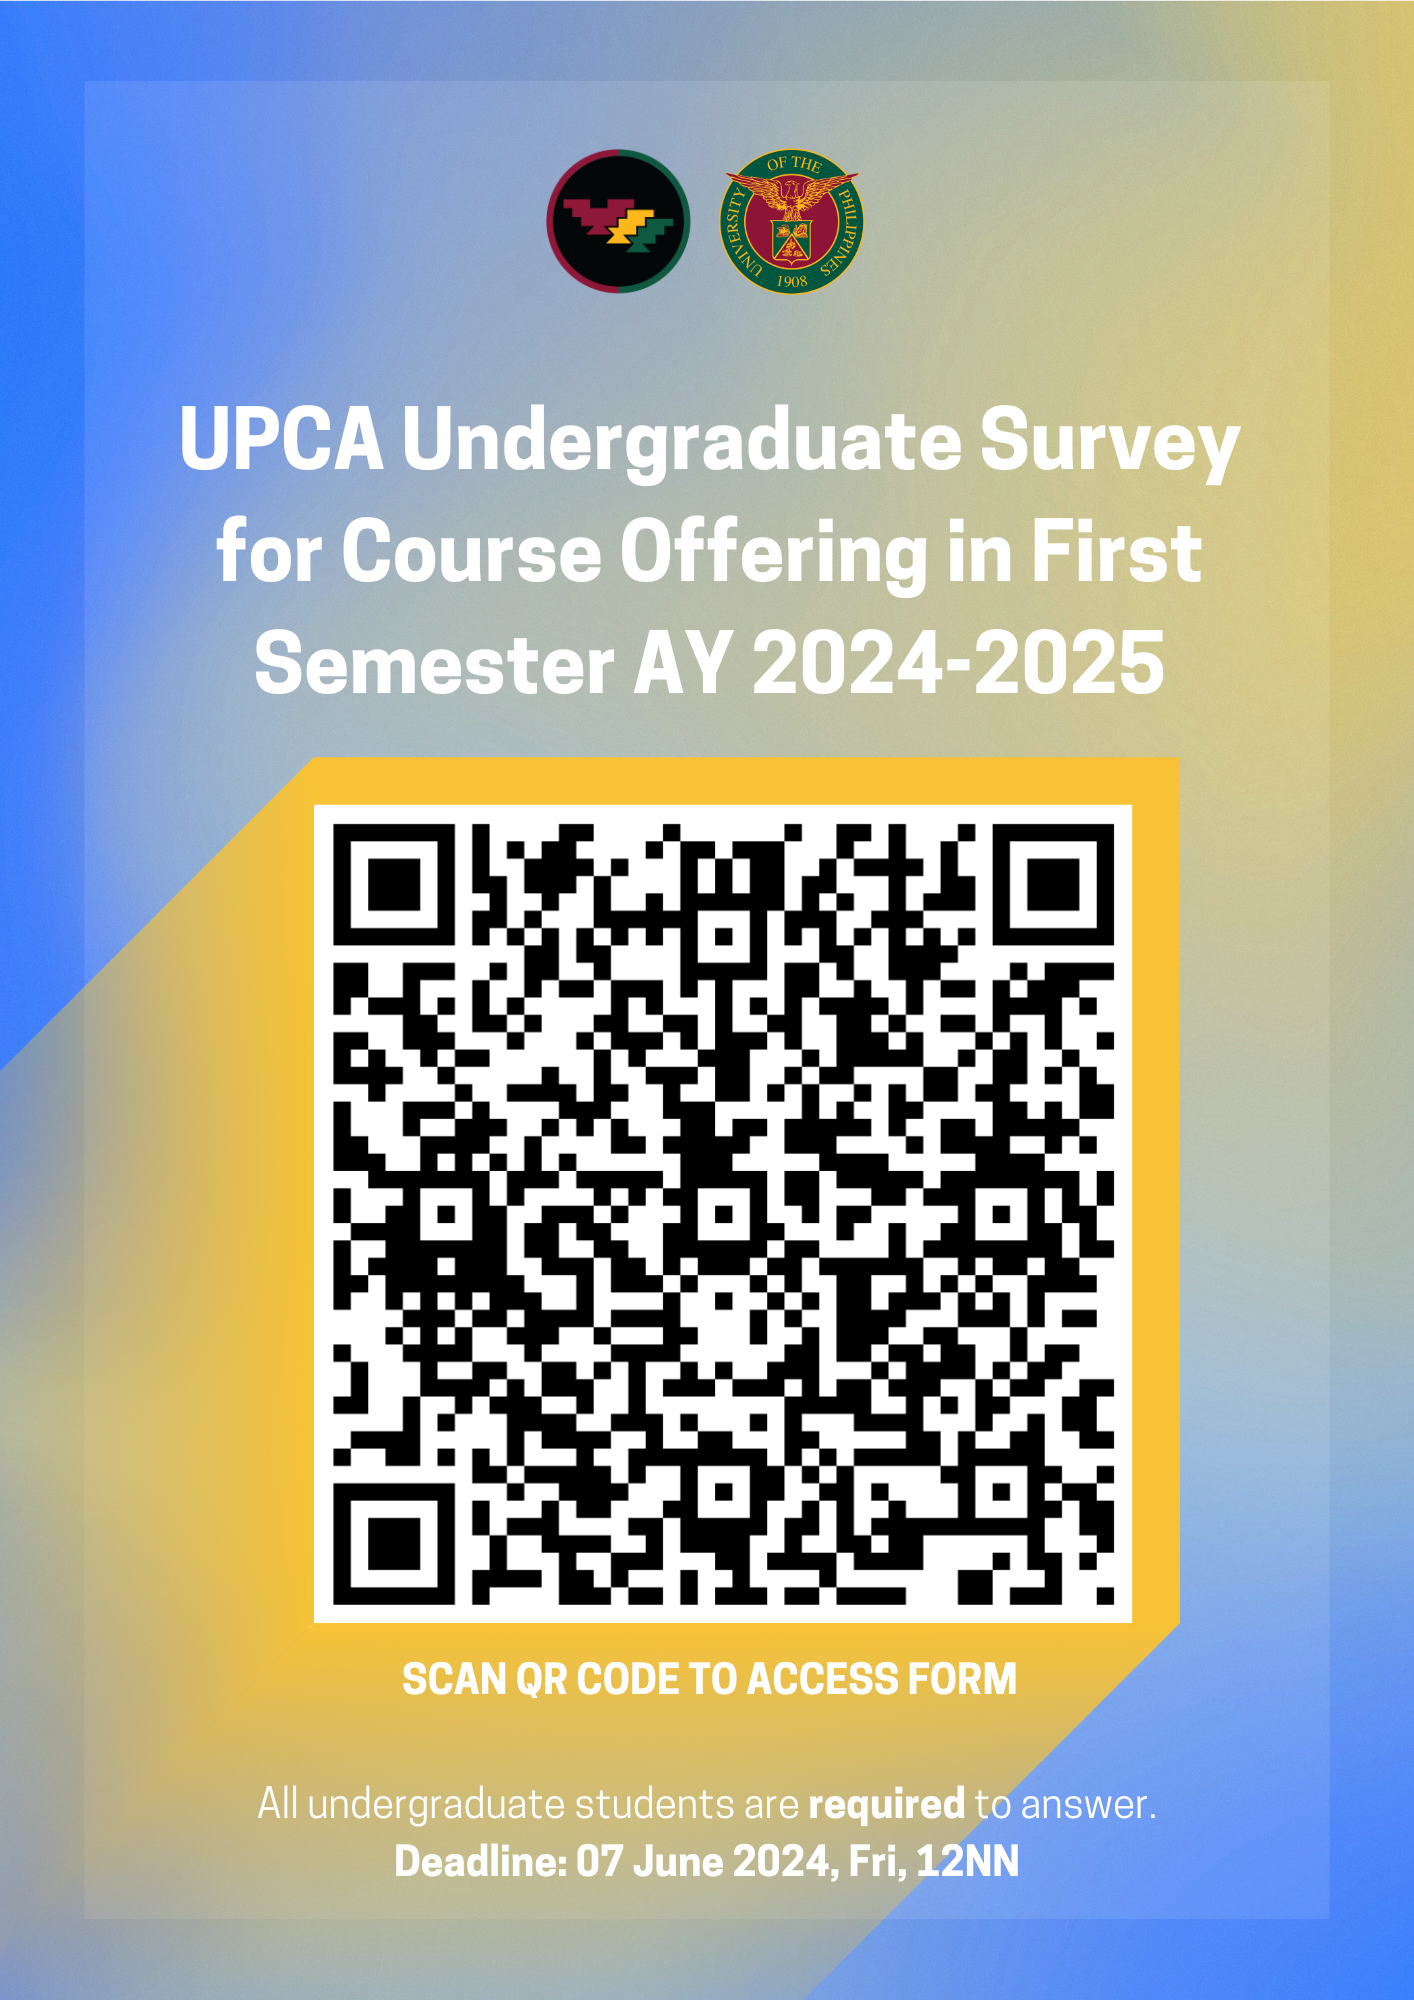 UPCA UNDERGRADUATE SURVEY FOR COURSE OFFERING IN FIRST SEMESTER AY 2024-2025